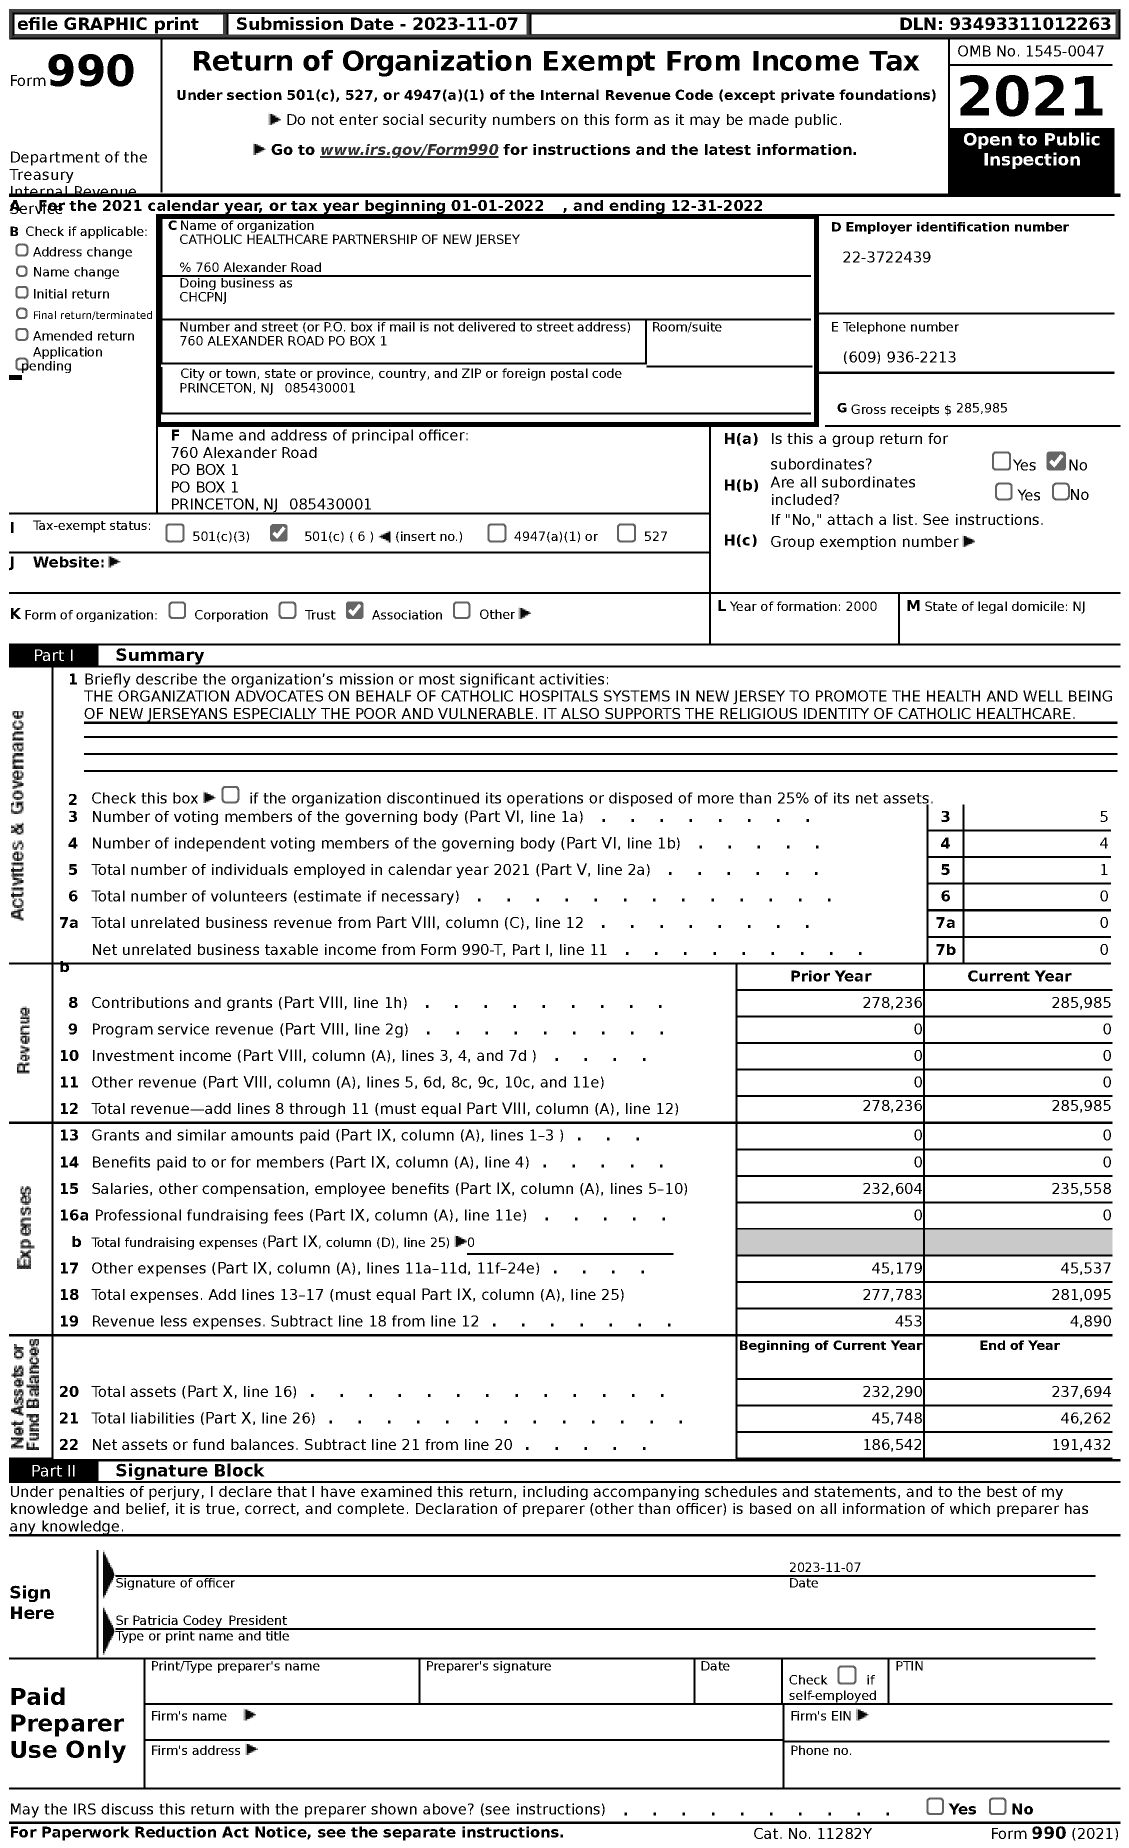 Image of first page of 2022 Form 990 for Catholic Healthcare Partnership of New Jersey (CHCPNJ)